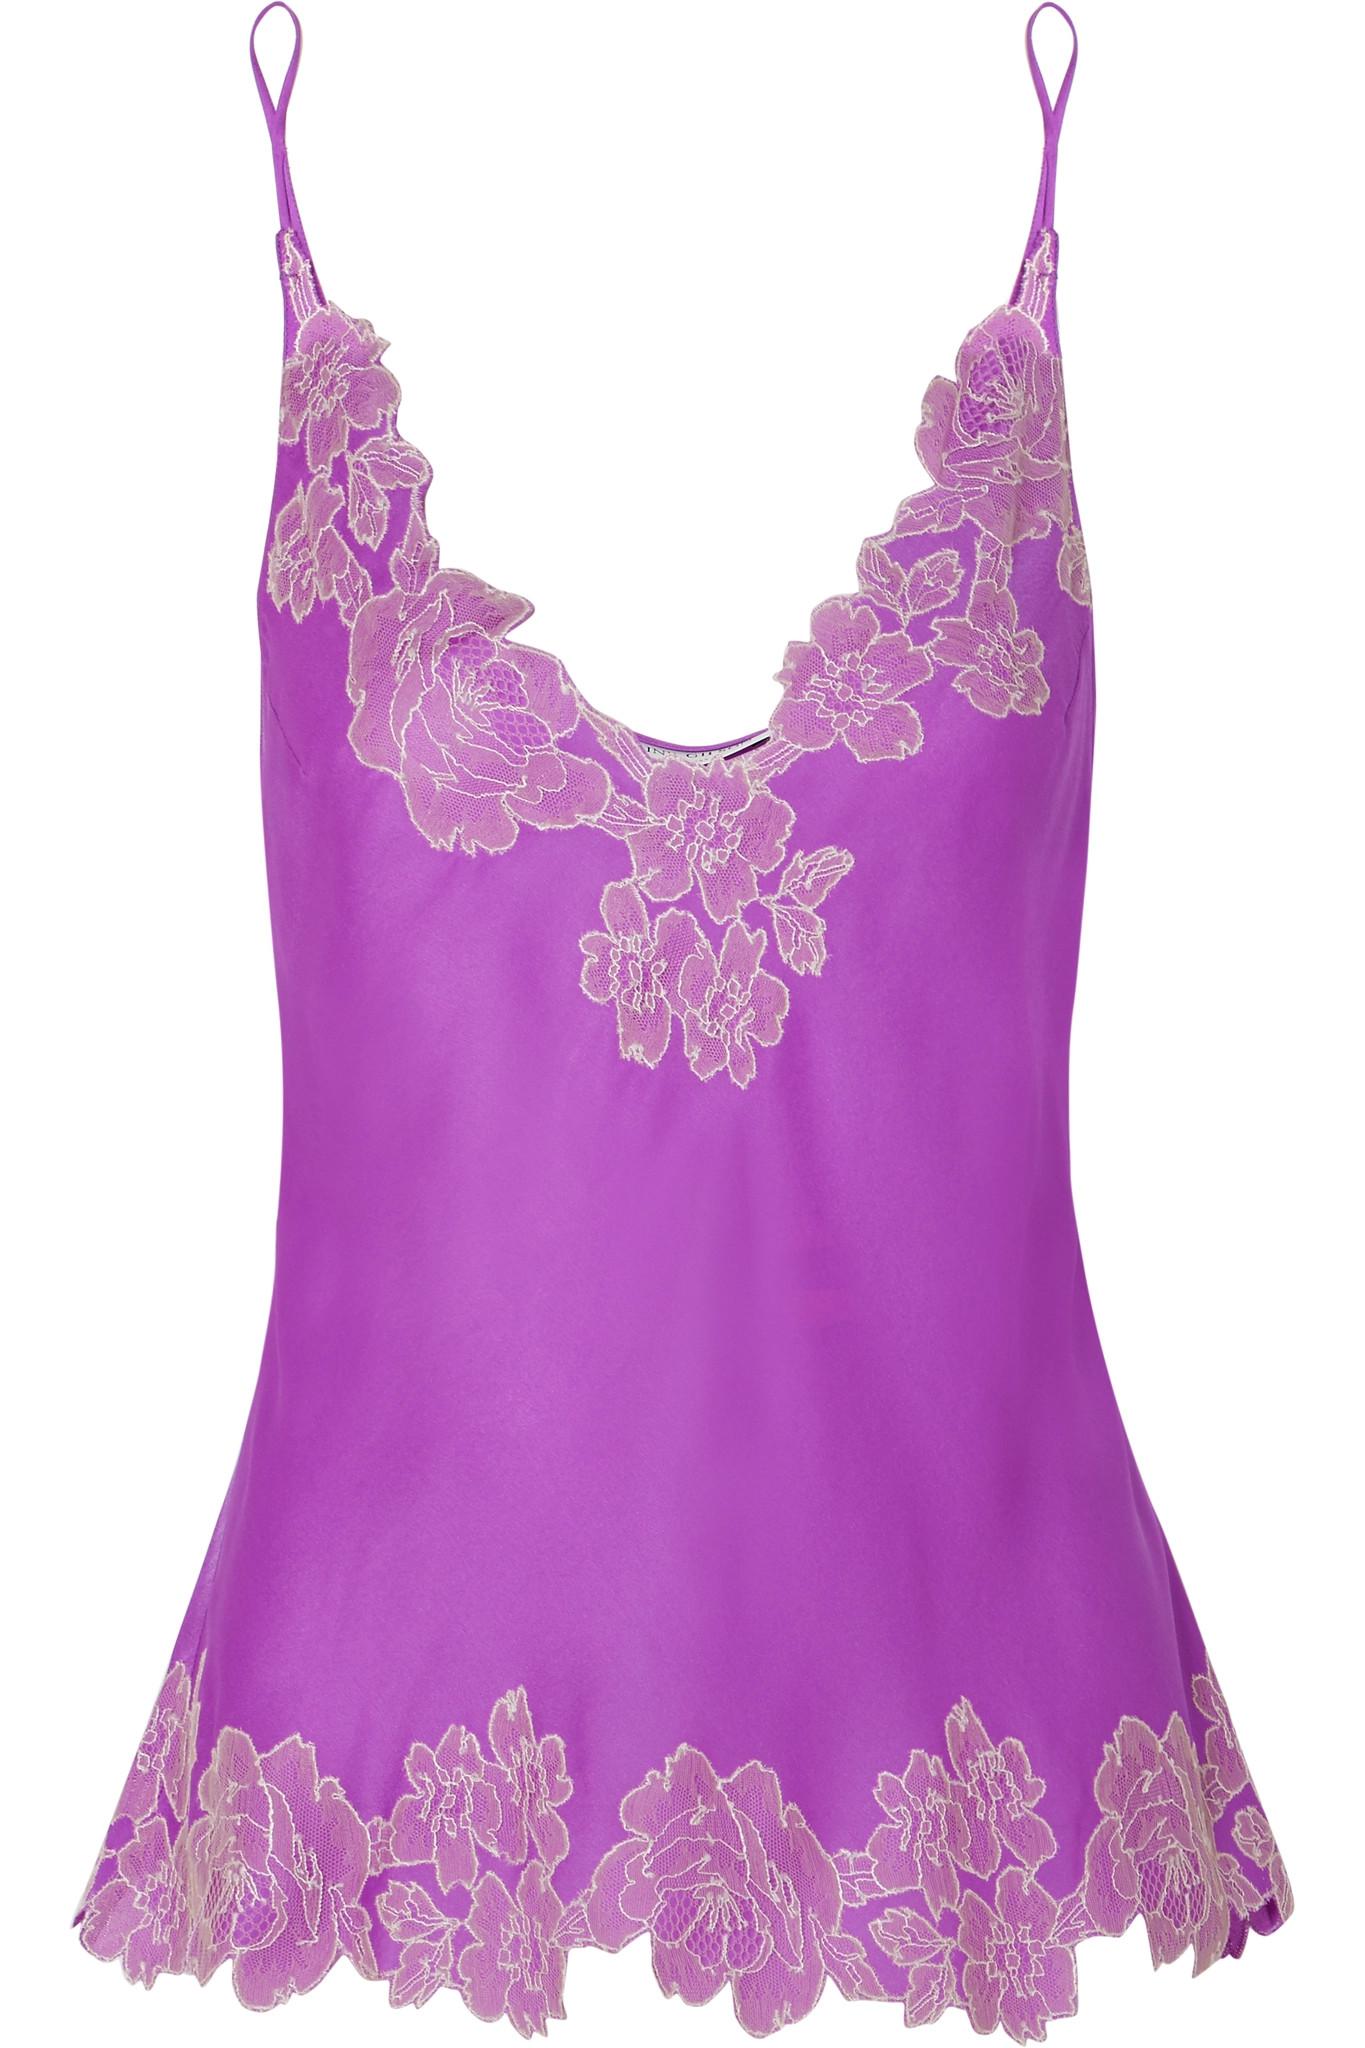 Lyst - Carine gilson Lace-trimmed Silk-satin Camisole in Purple